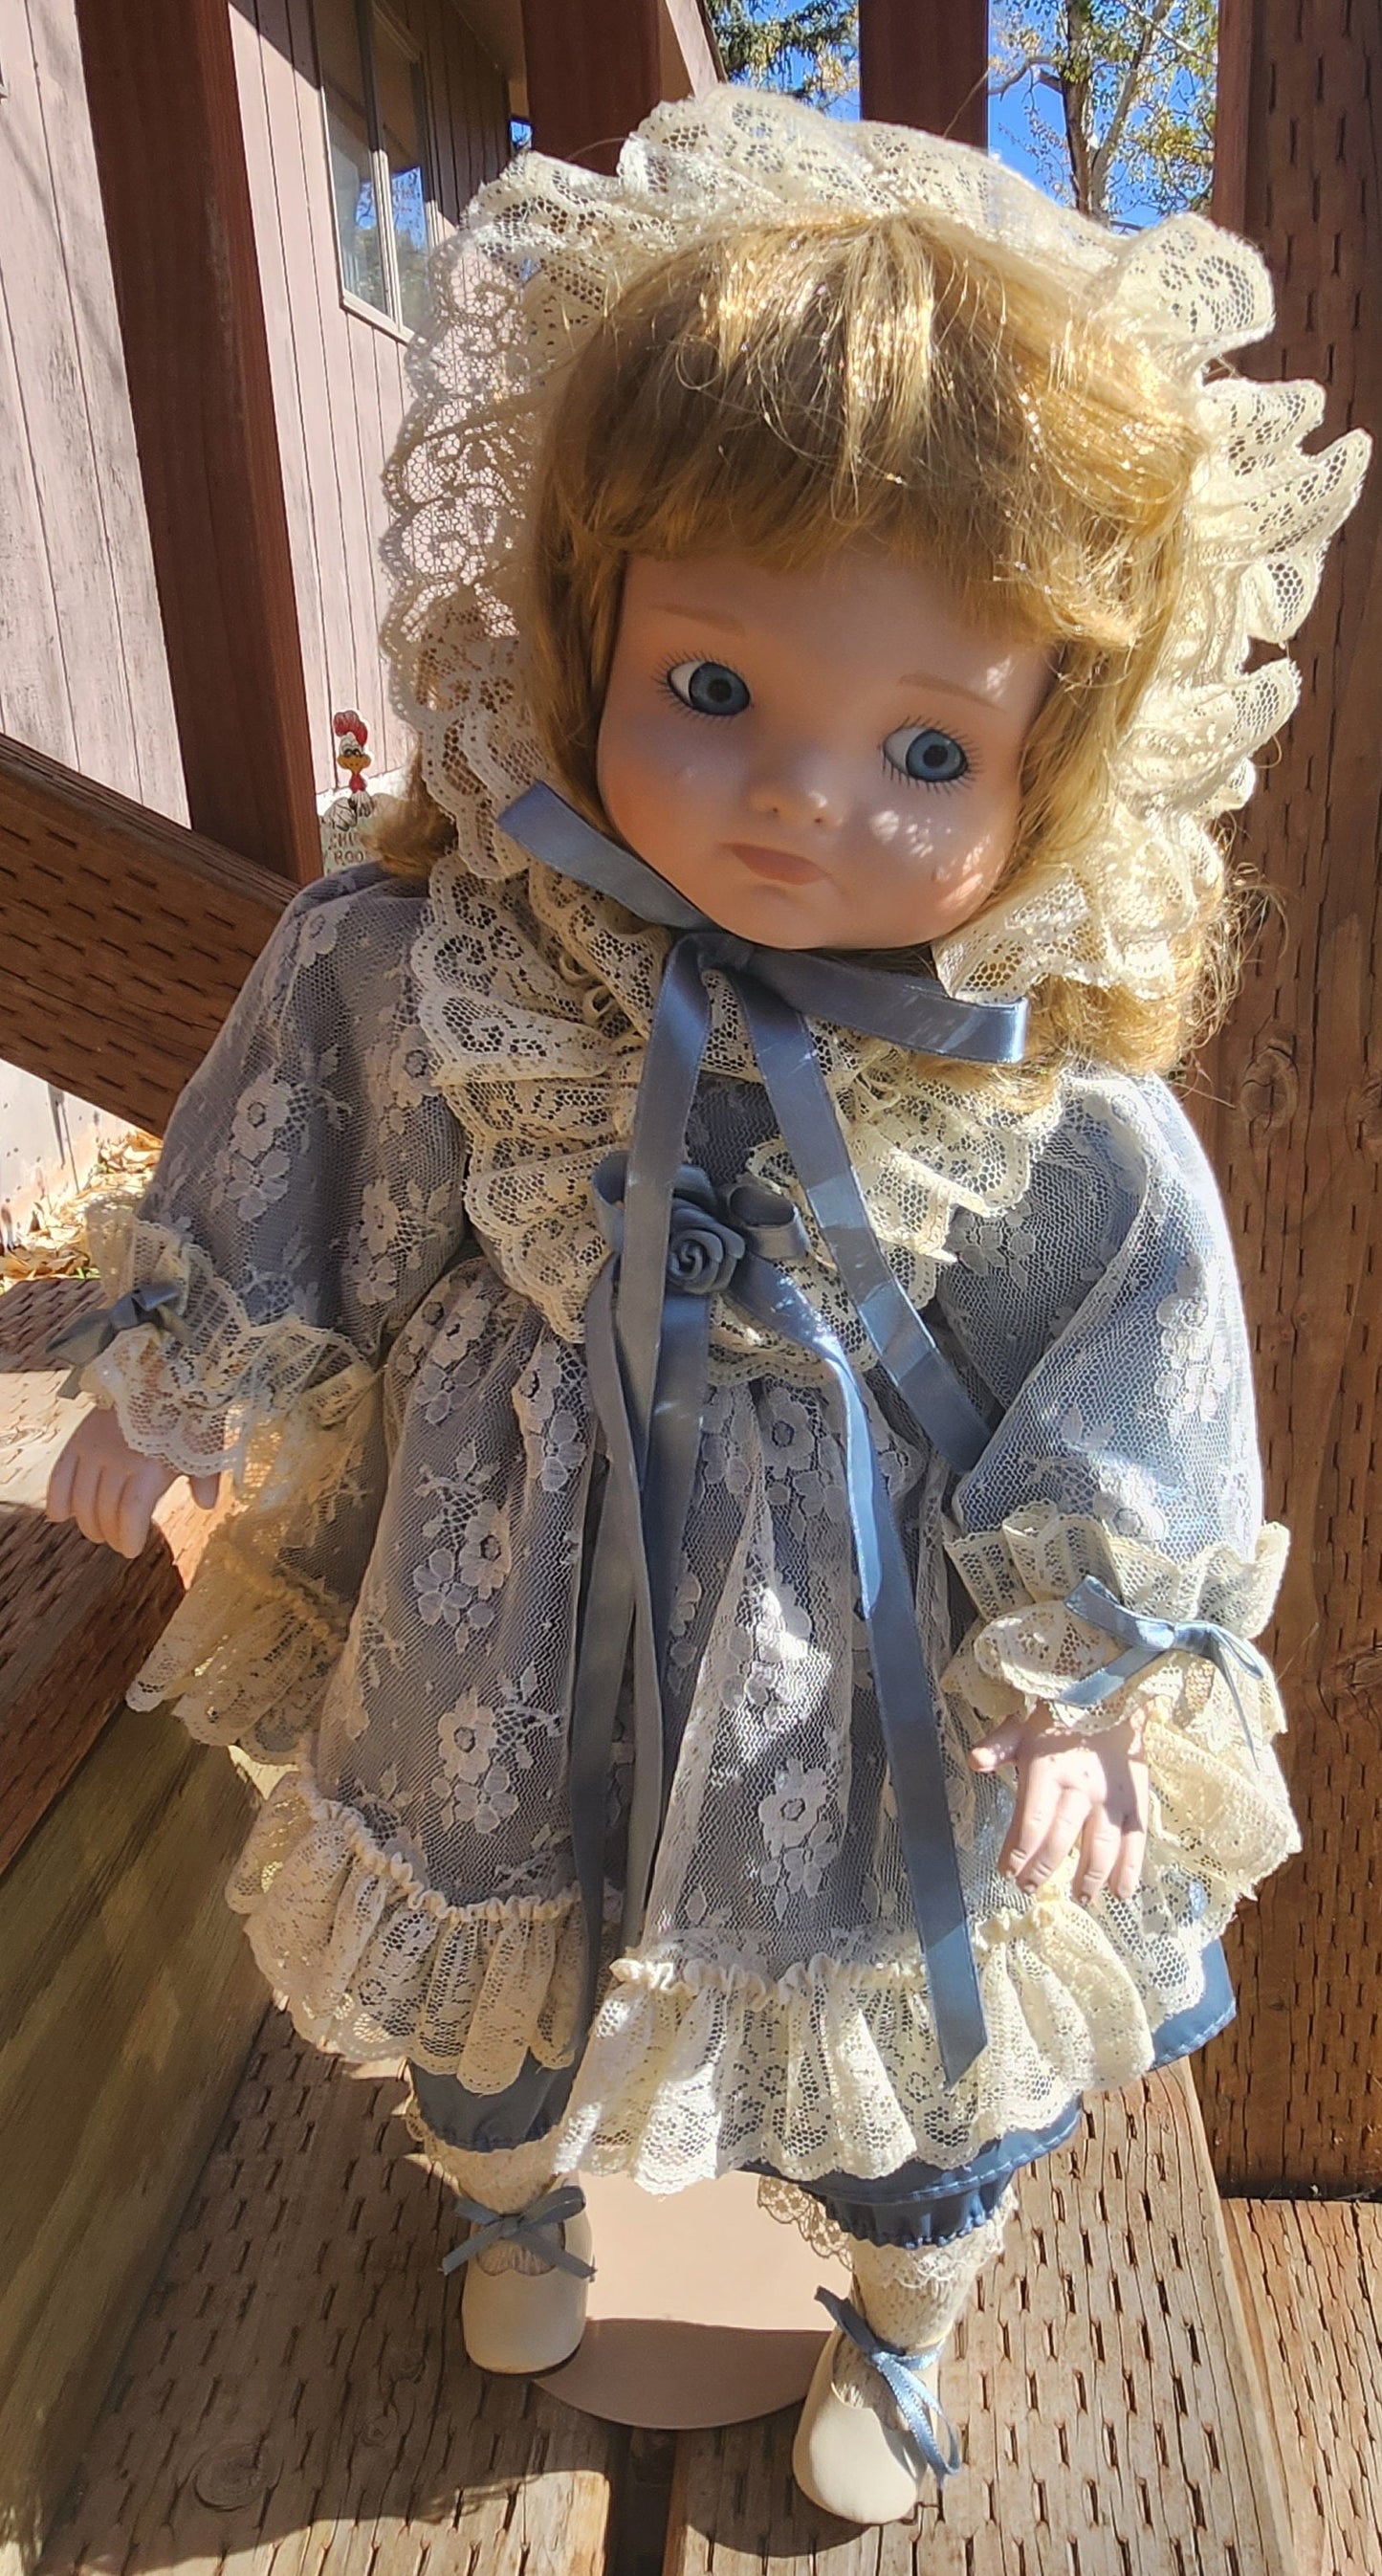 Joanne By Seymour Mann 18" Porcelain Doll Collectible